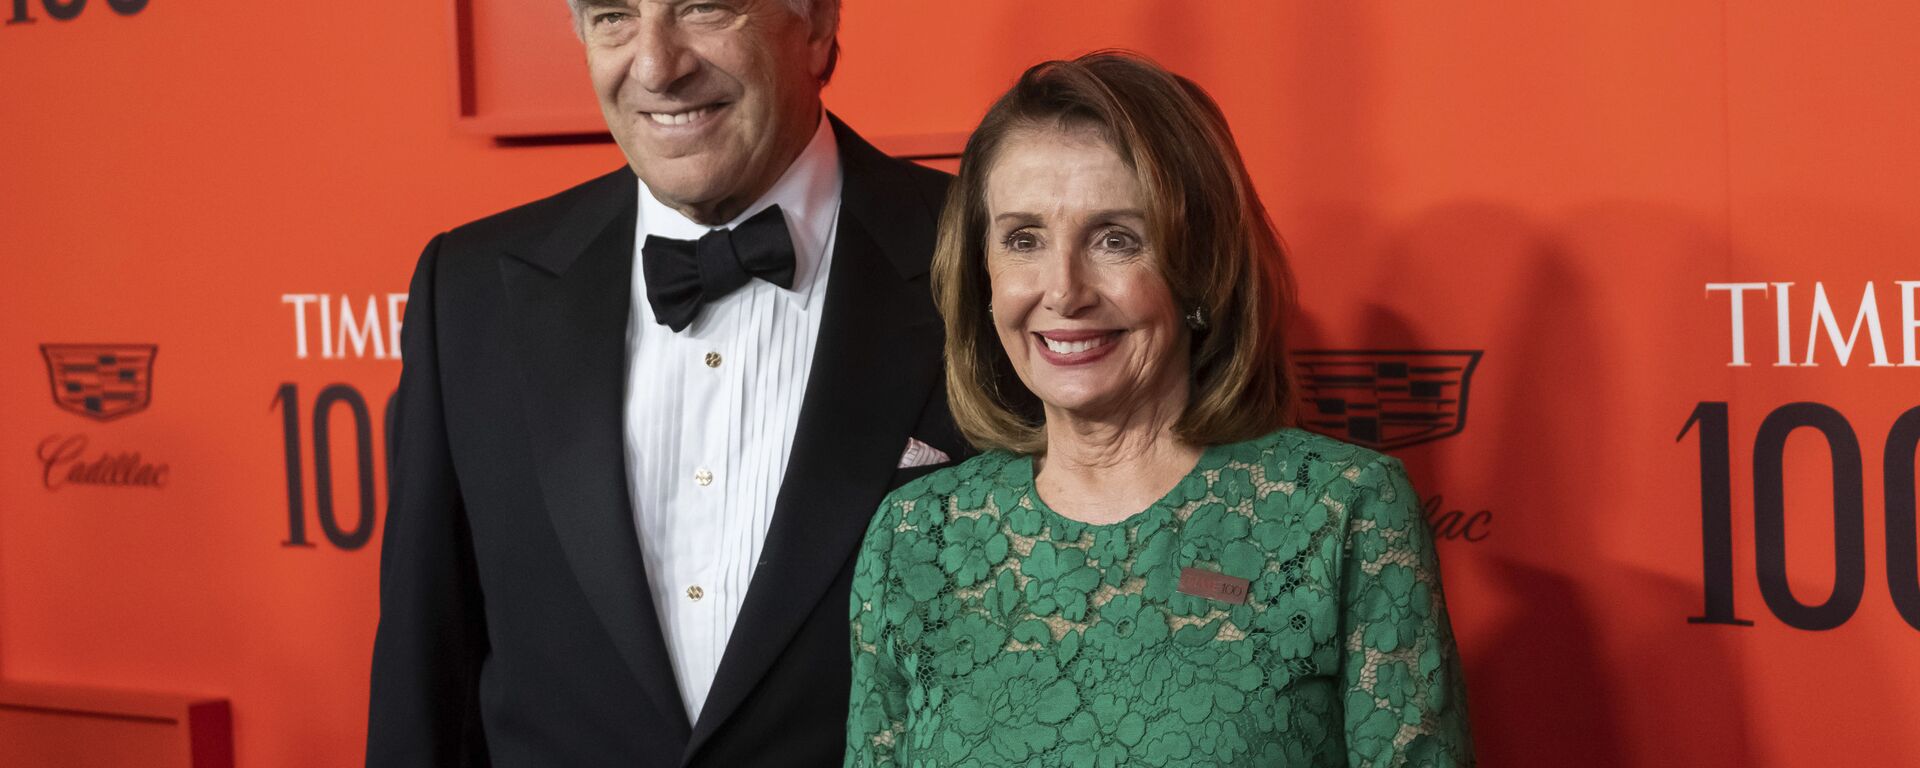 Paul Pelosi and Nancy Pelosi attend the 2019 Time 100 Gala, celebrating the 100 most influential people in the world, at Frederick P. Rose Hall, Jazz at Lincoln Center on Tuesday, April 23, 2019, in New York - Sputnik International, 1920, 31.05.2022